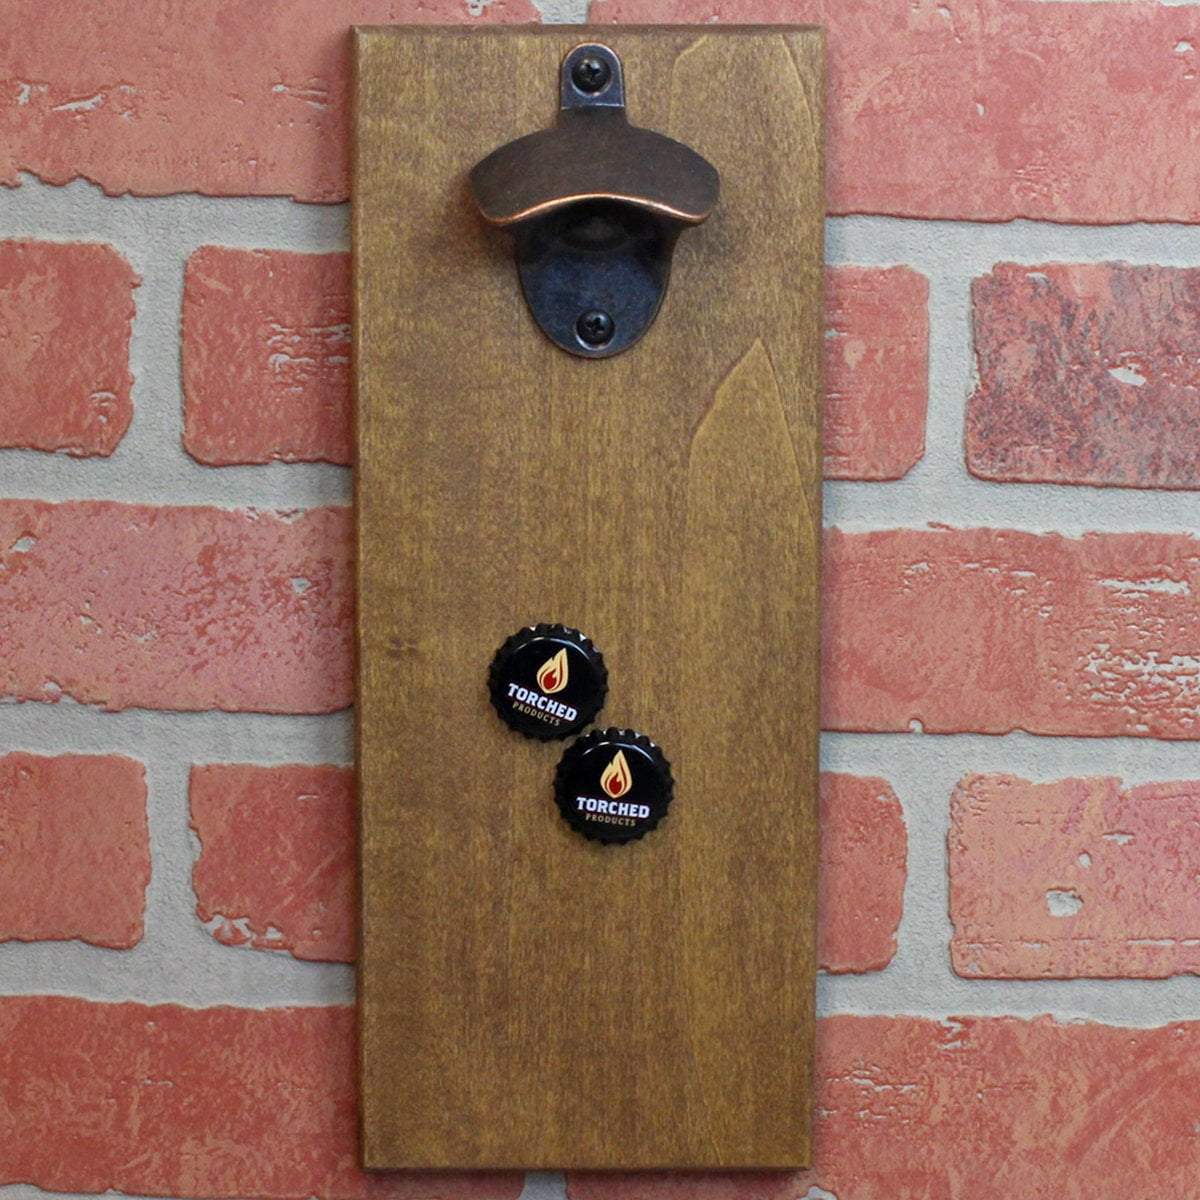 Drink Up Witches! Wall Mounted Magnetic Bottle Opener - Torched Products